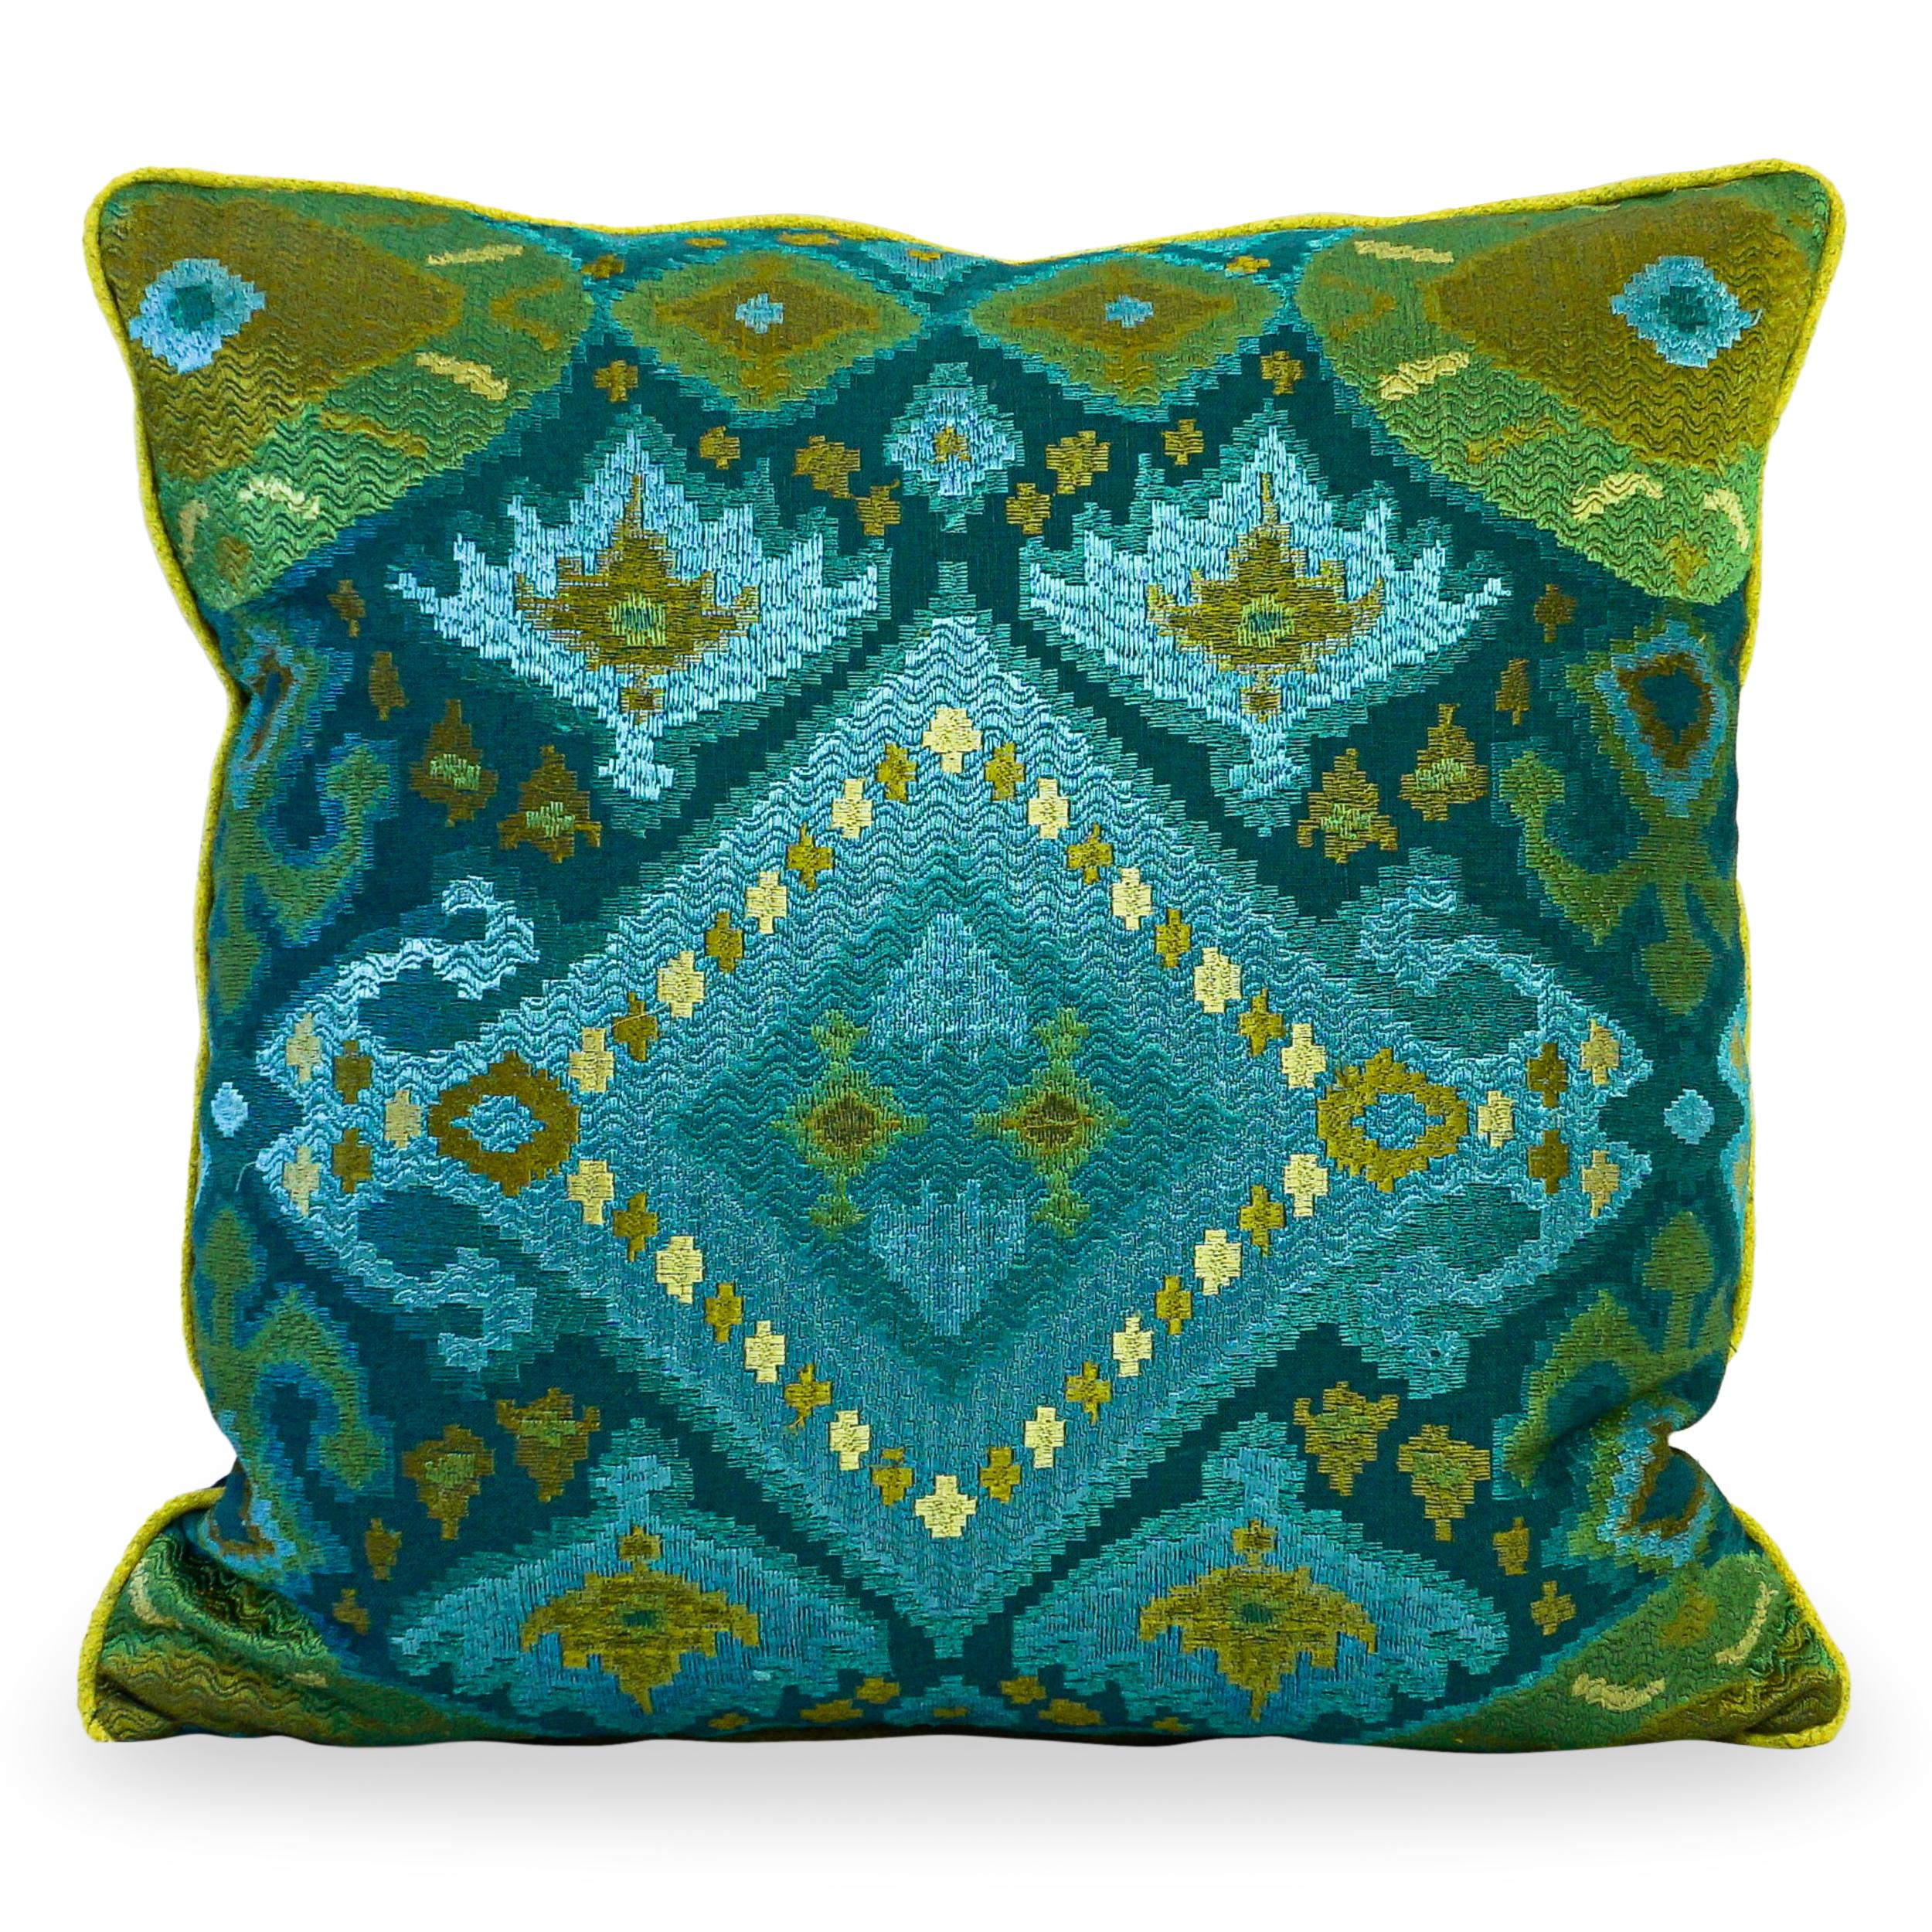 Handmade throw pillows with Jim Thompson peacock color fabric on face and deep green blue velvet back. Down/feather insert and invisible zipper.

Measurements:
Overall: 18”W x 18”H

Price As Shown: $1,030 as a pair
Customization may change